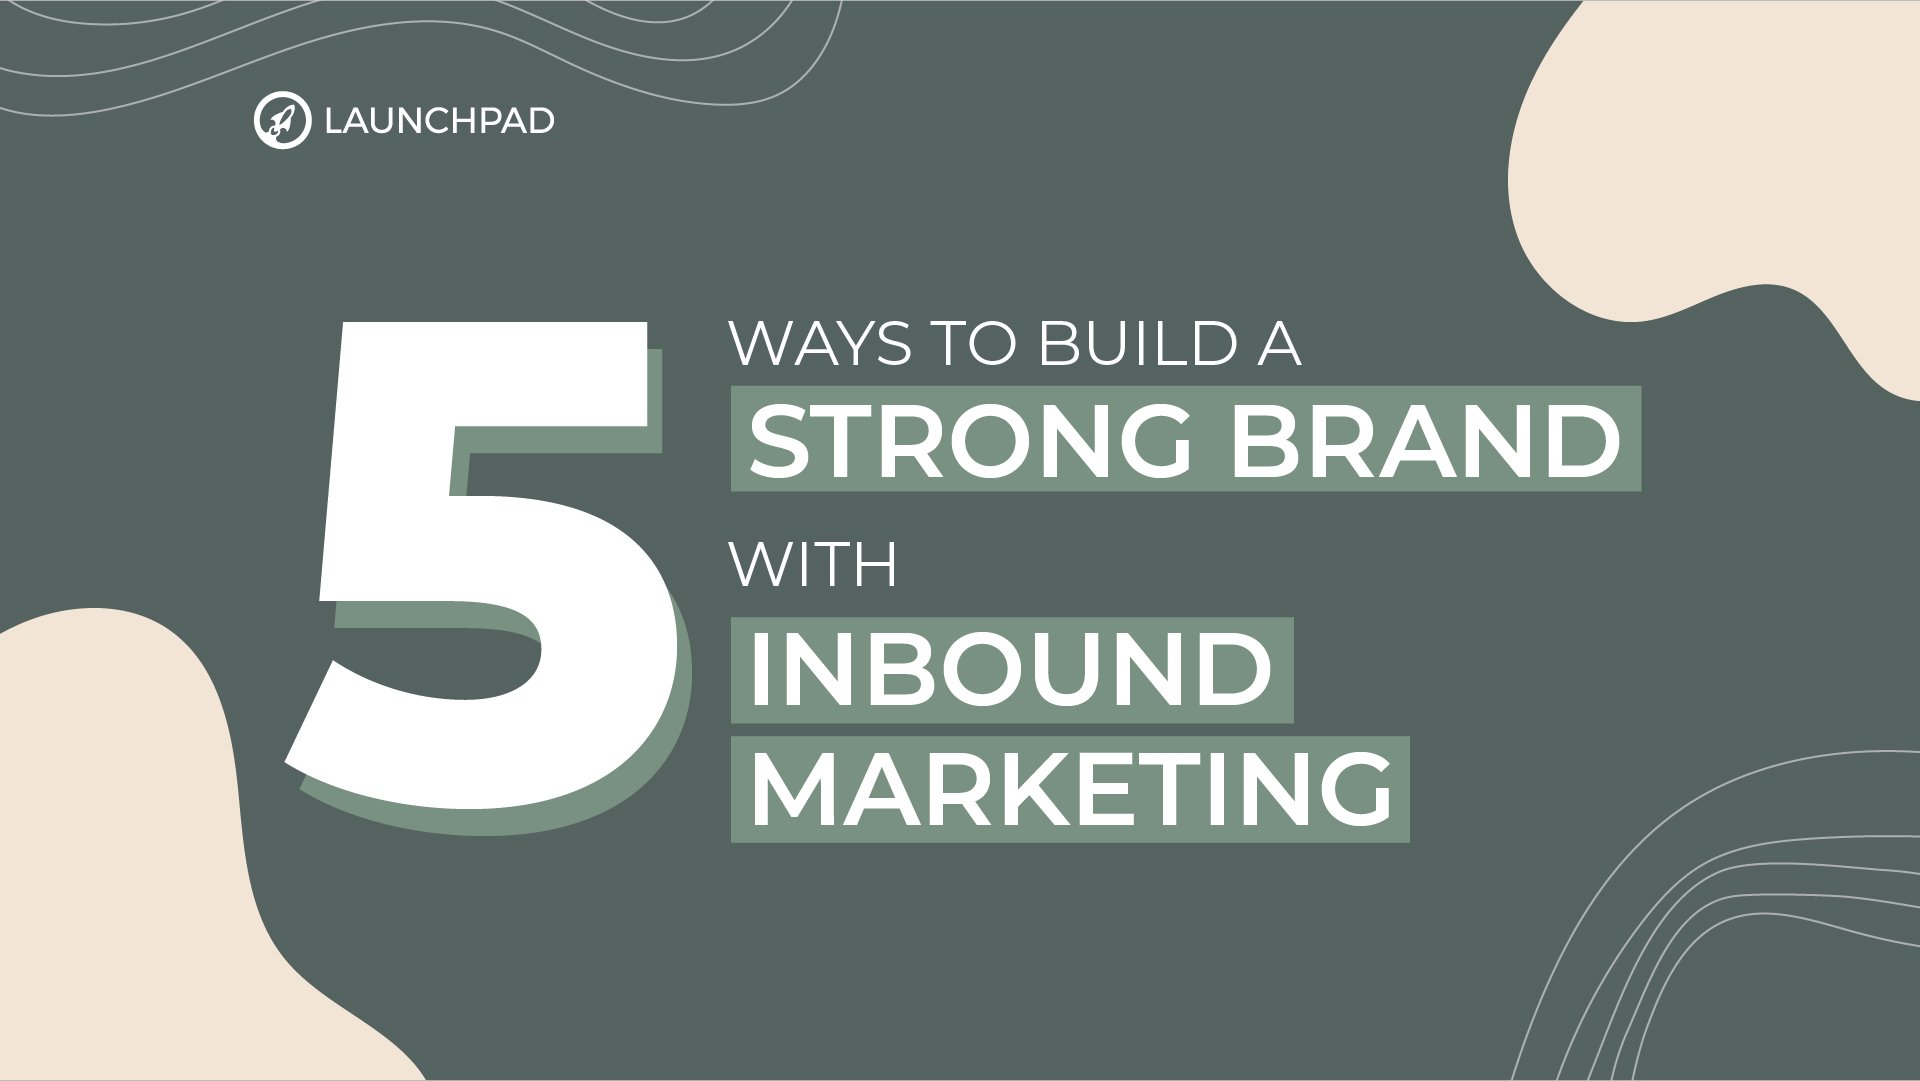 5 ways to build a strong brand with inbound marketing